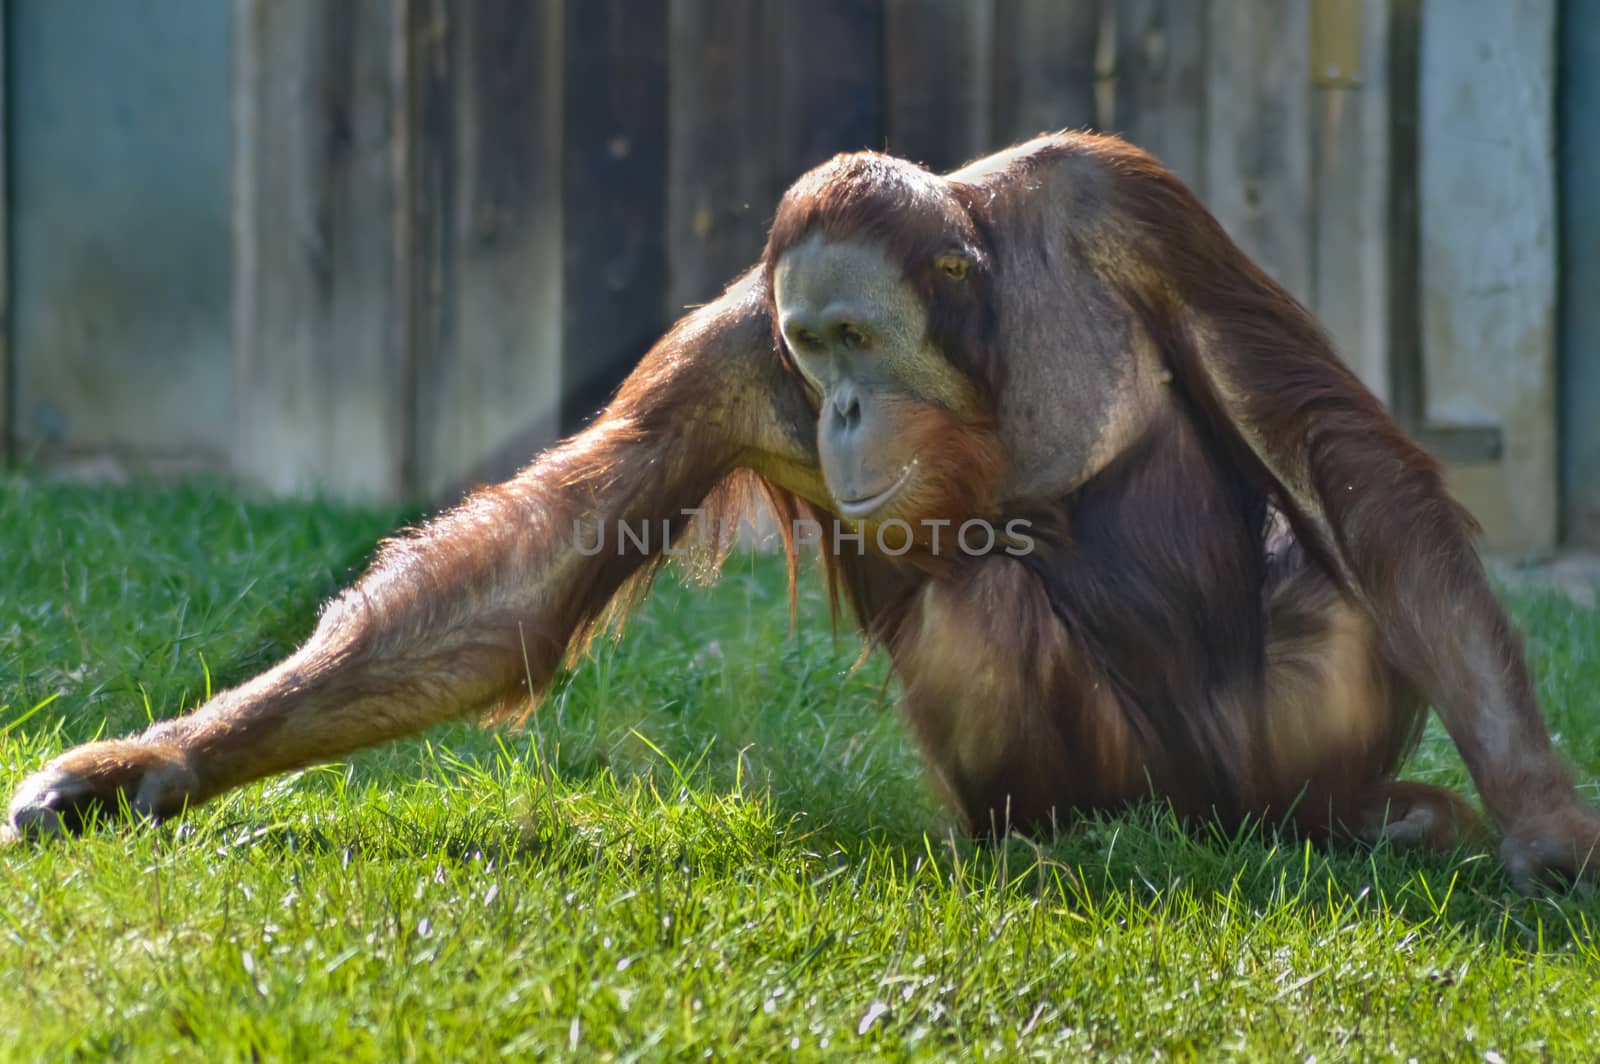 Monkey Orang-Outang walking in a green meadow in an animal park